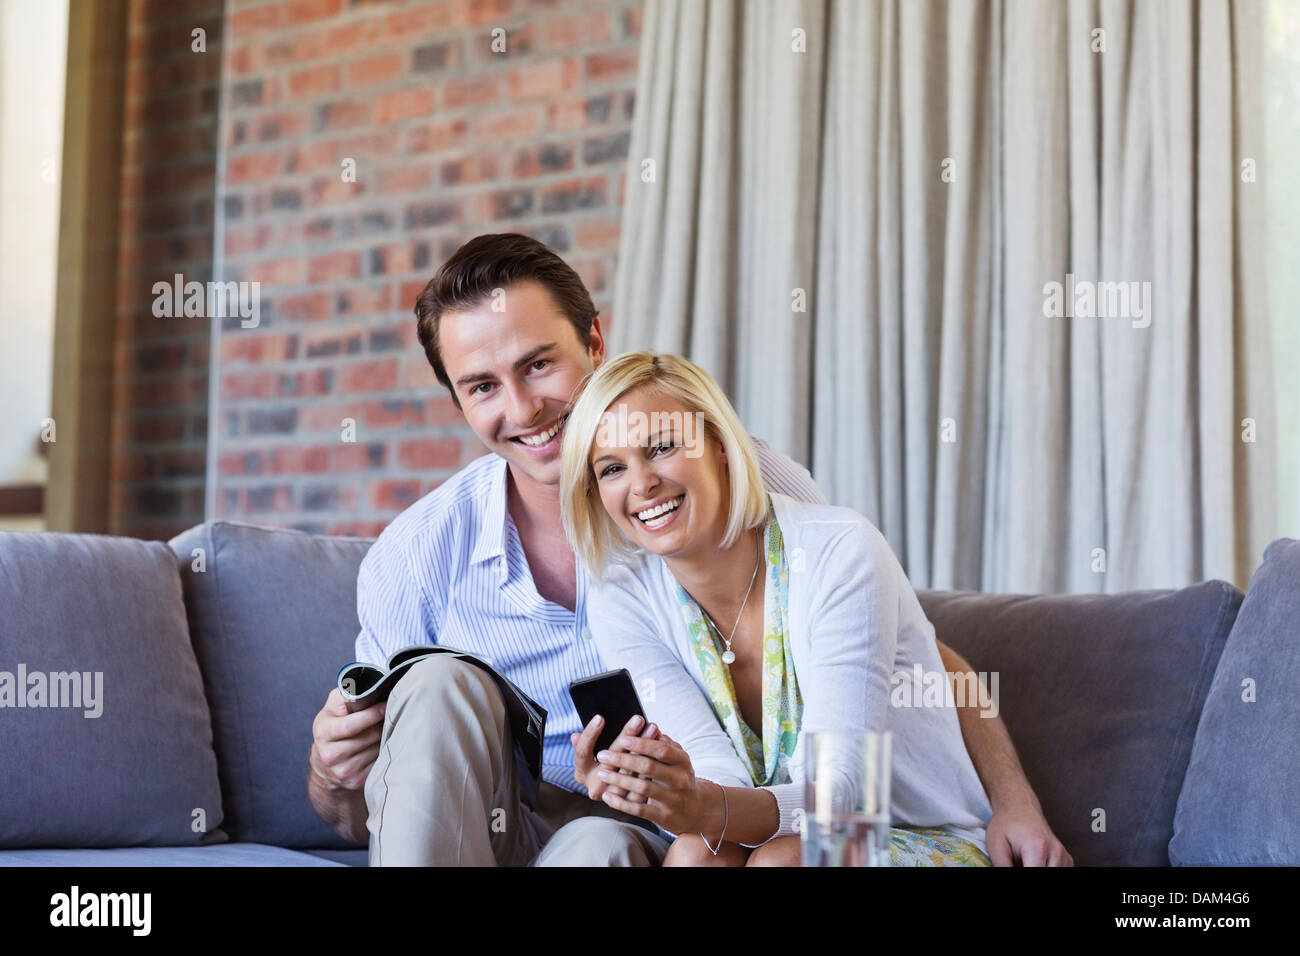 Couple relaxing on sofa together Stock Photo